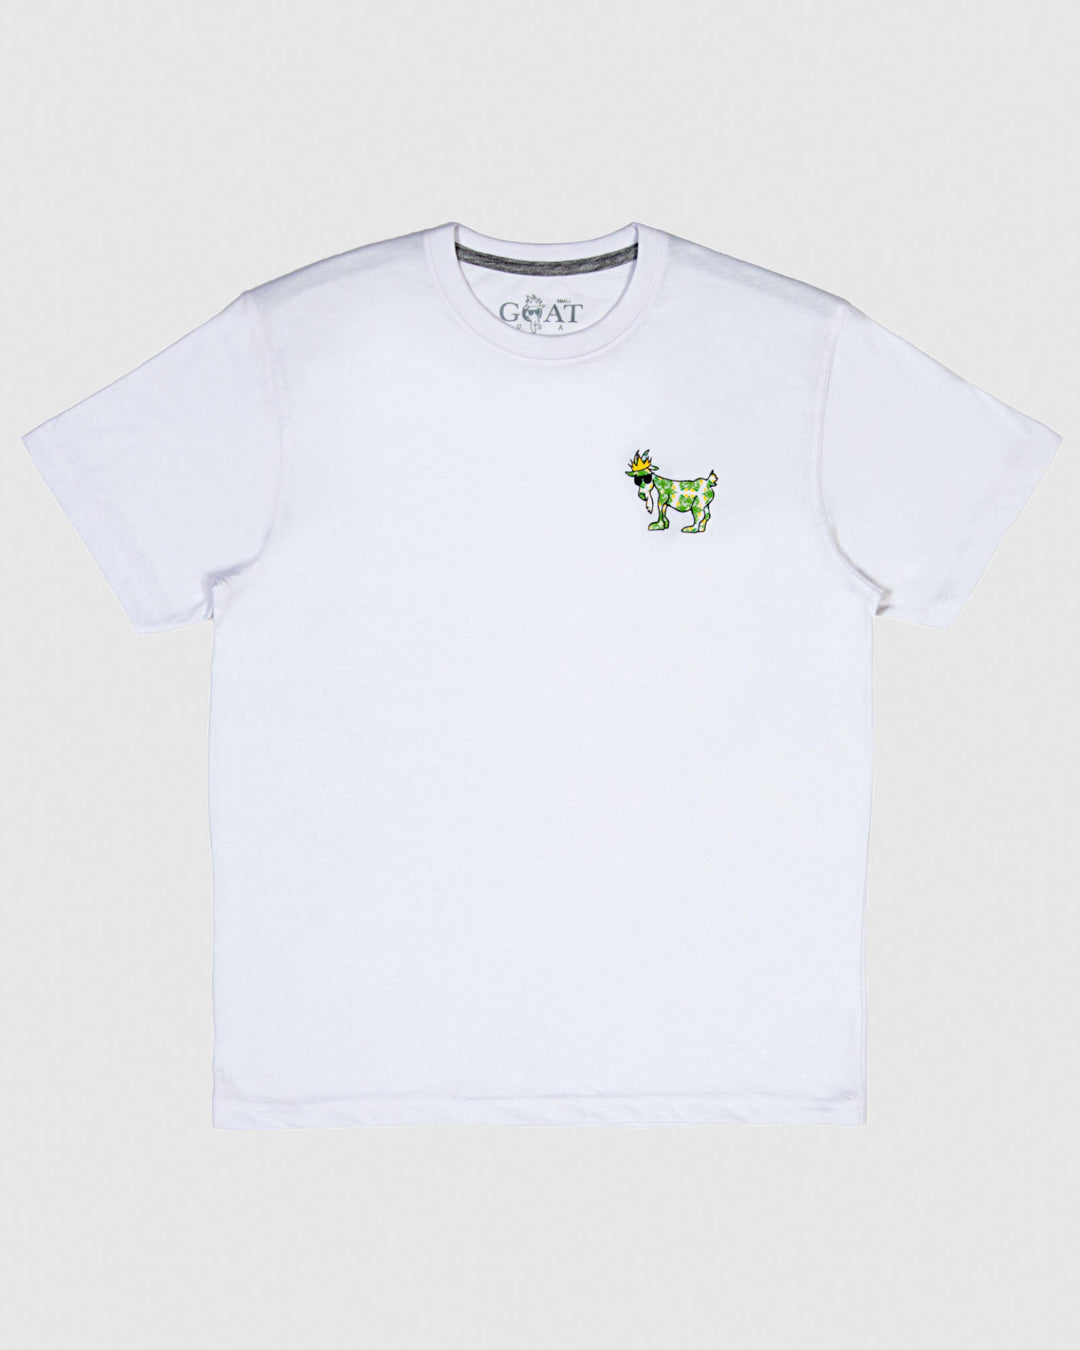 White t-shirt with yellow/green floral goat